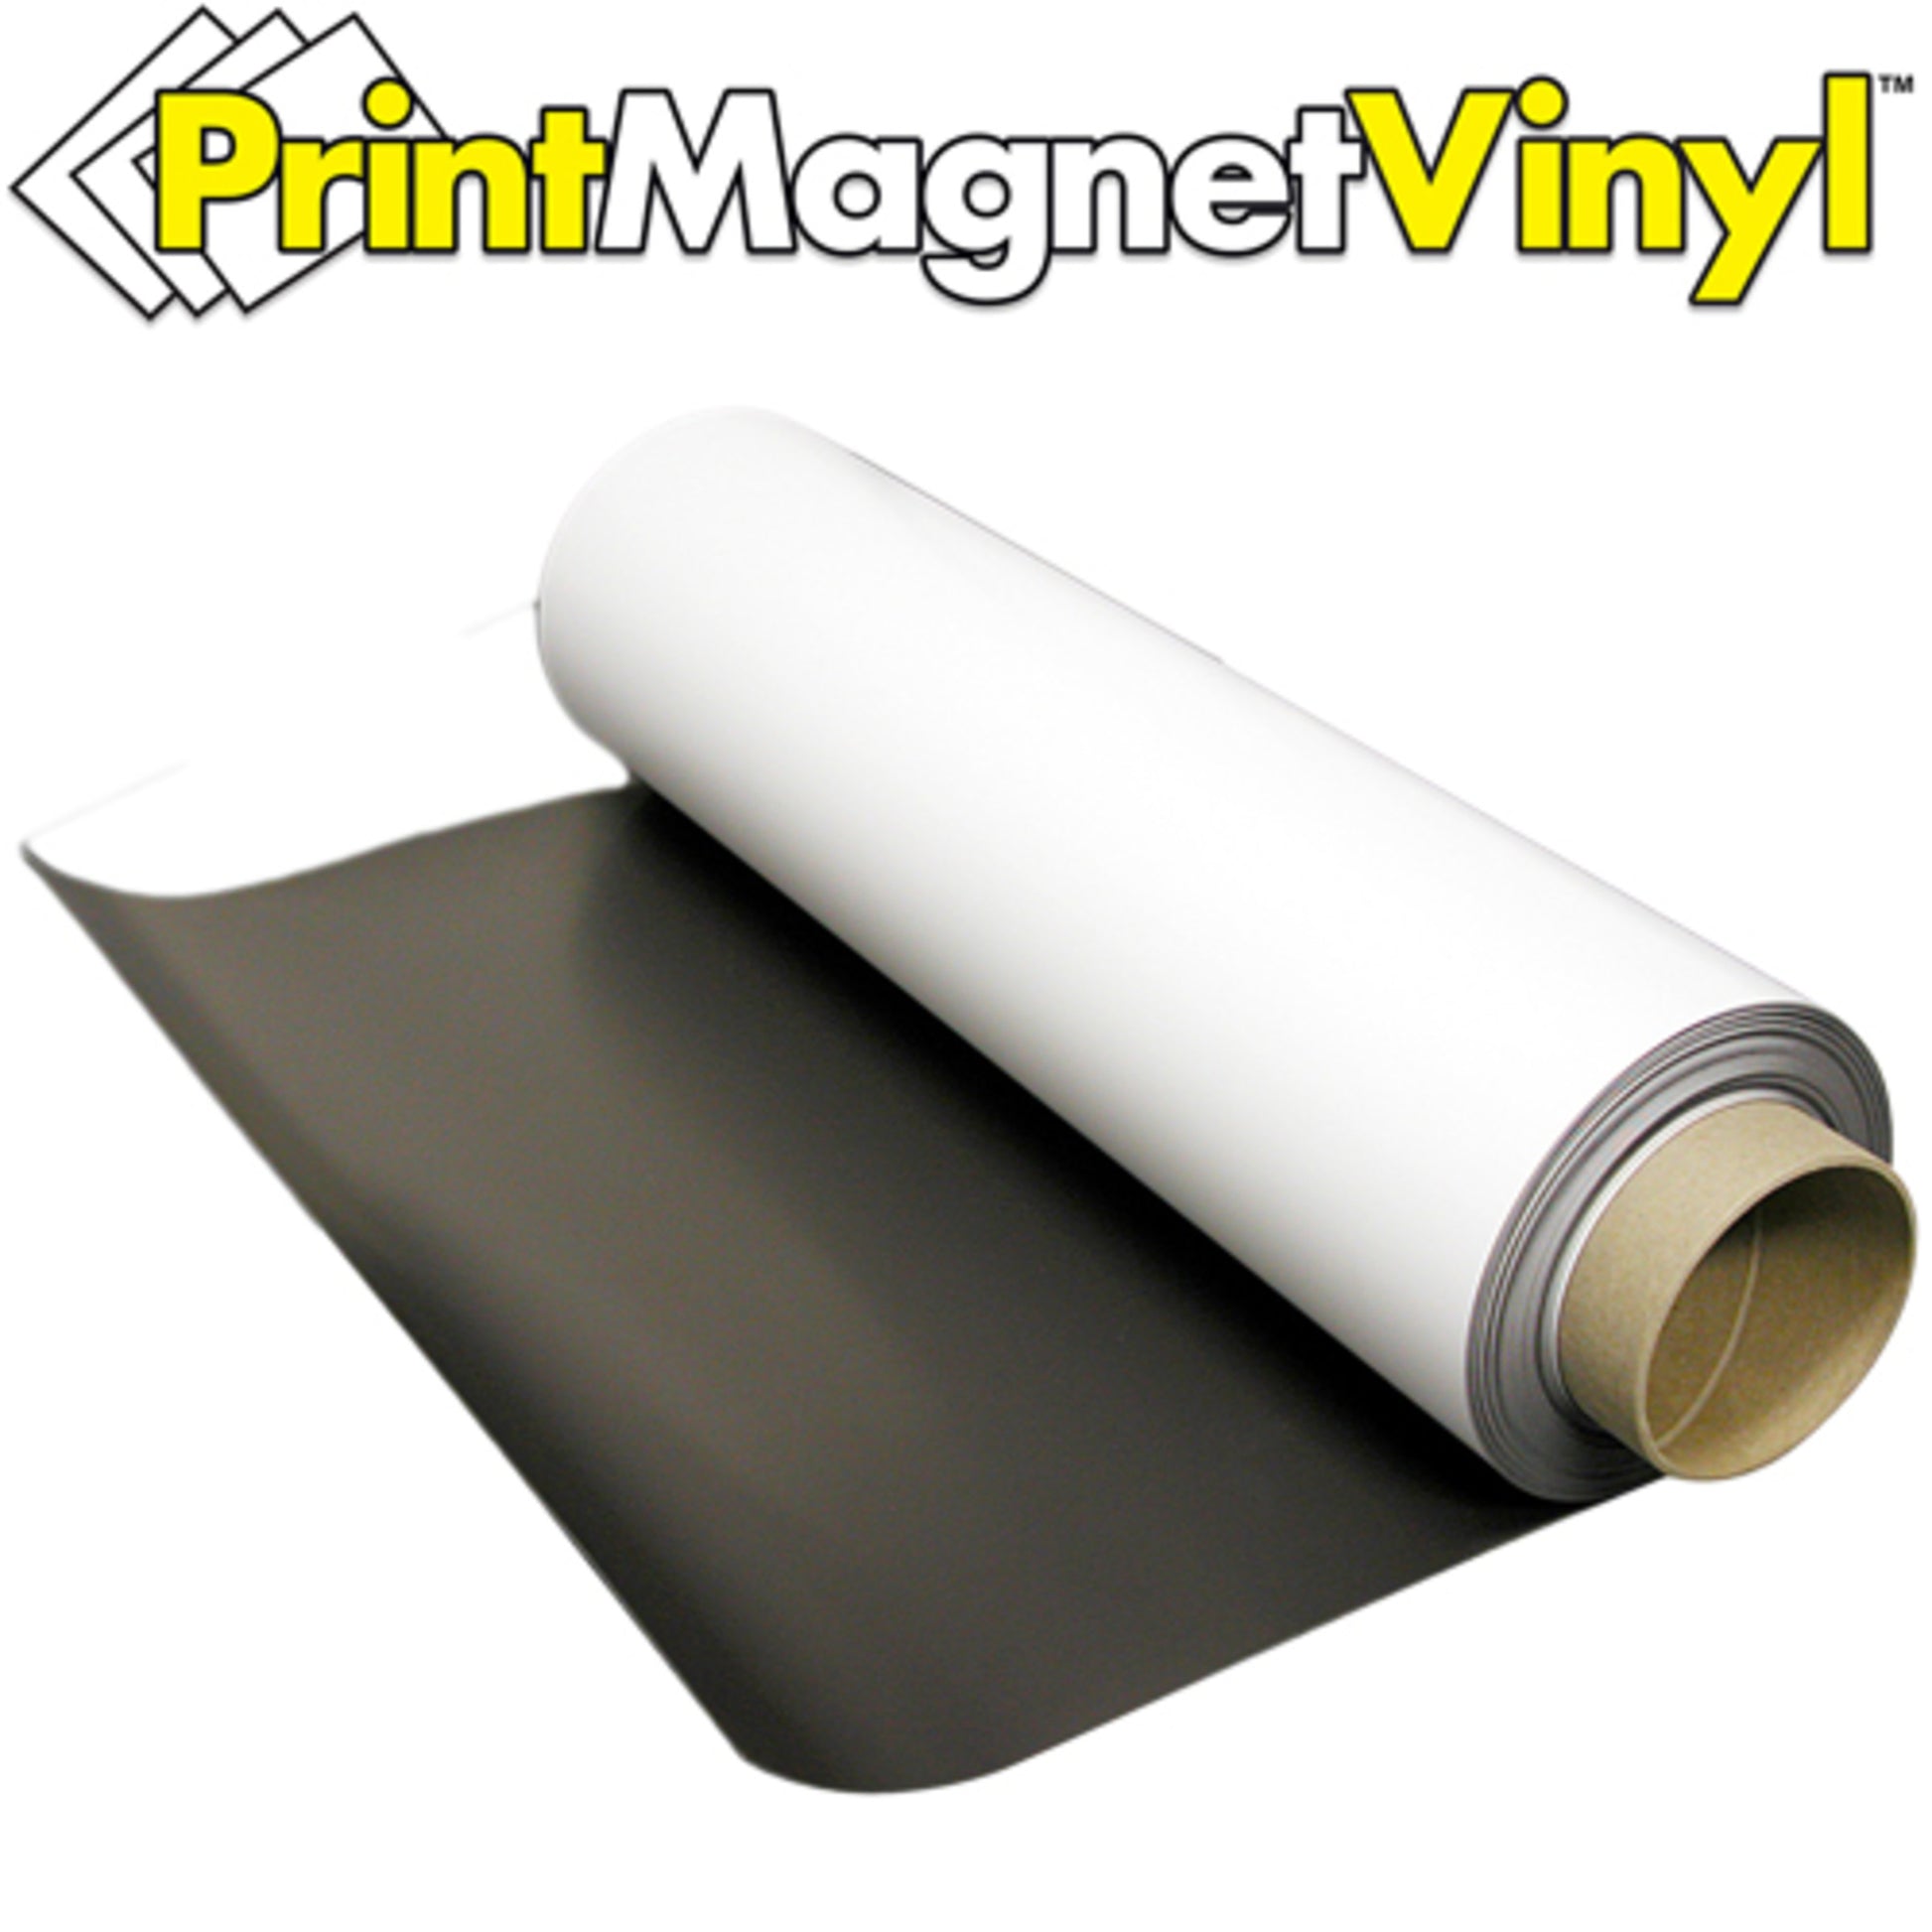 Load image into Gallery viewer, ZGN3024GW50 PrintMagnetVinyl™ Flexible Magnetic Sheet - In Use